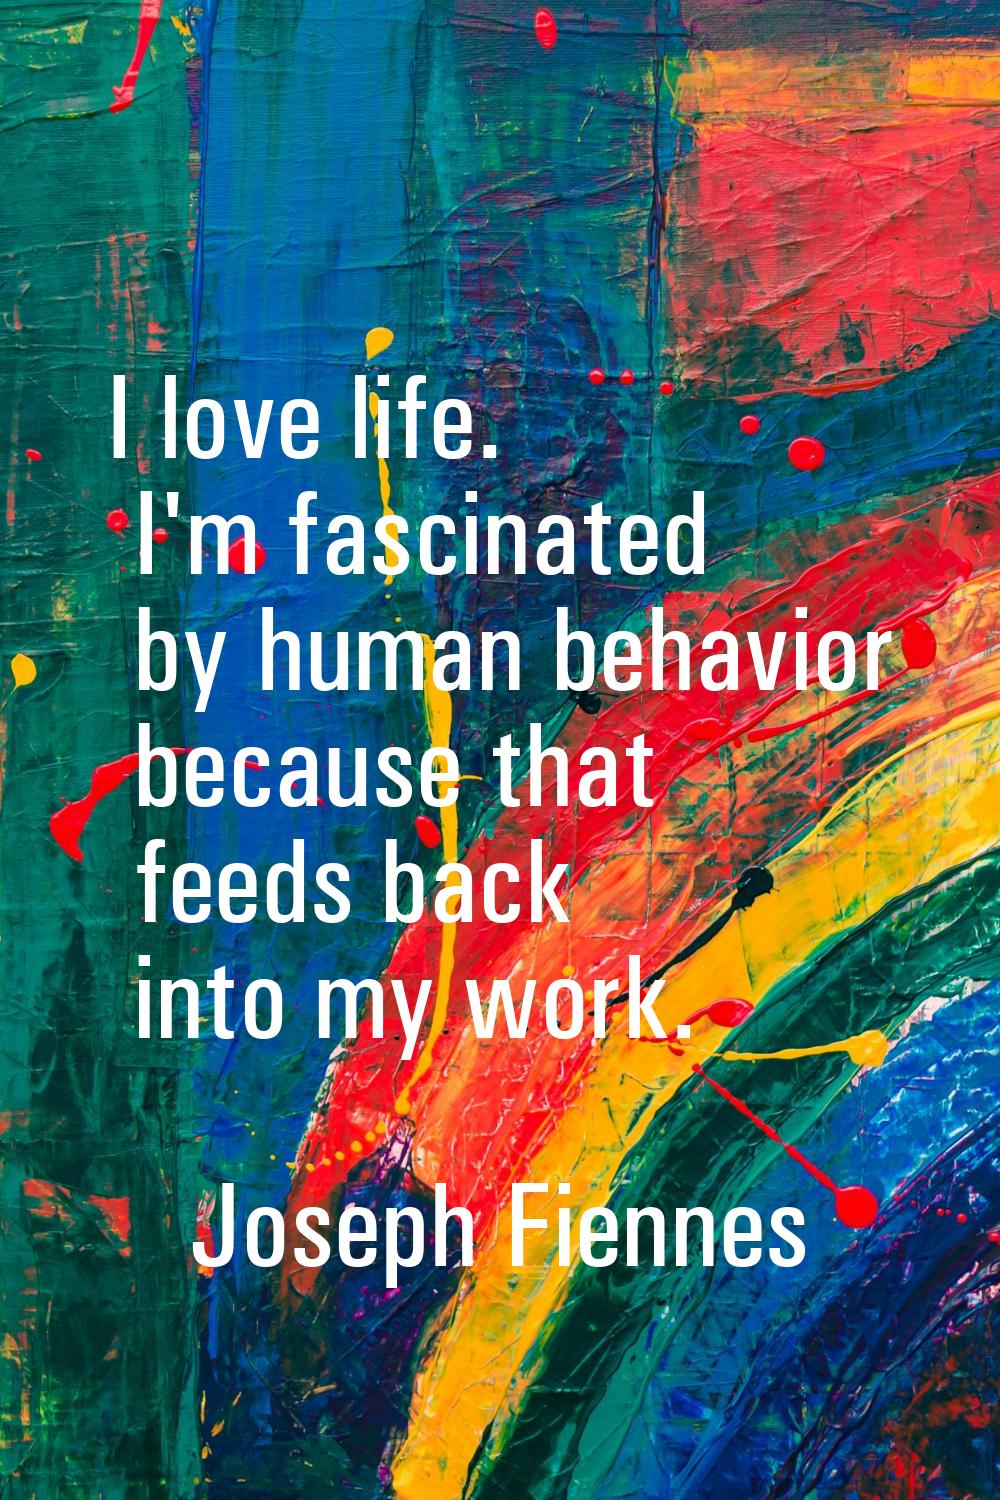 I love life. I'm fascinated by human behavior because that feeds back into my work.